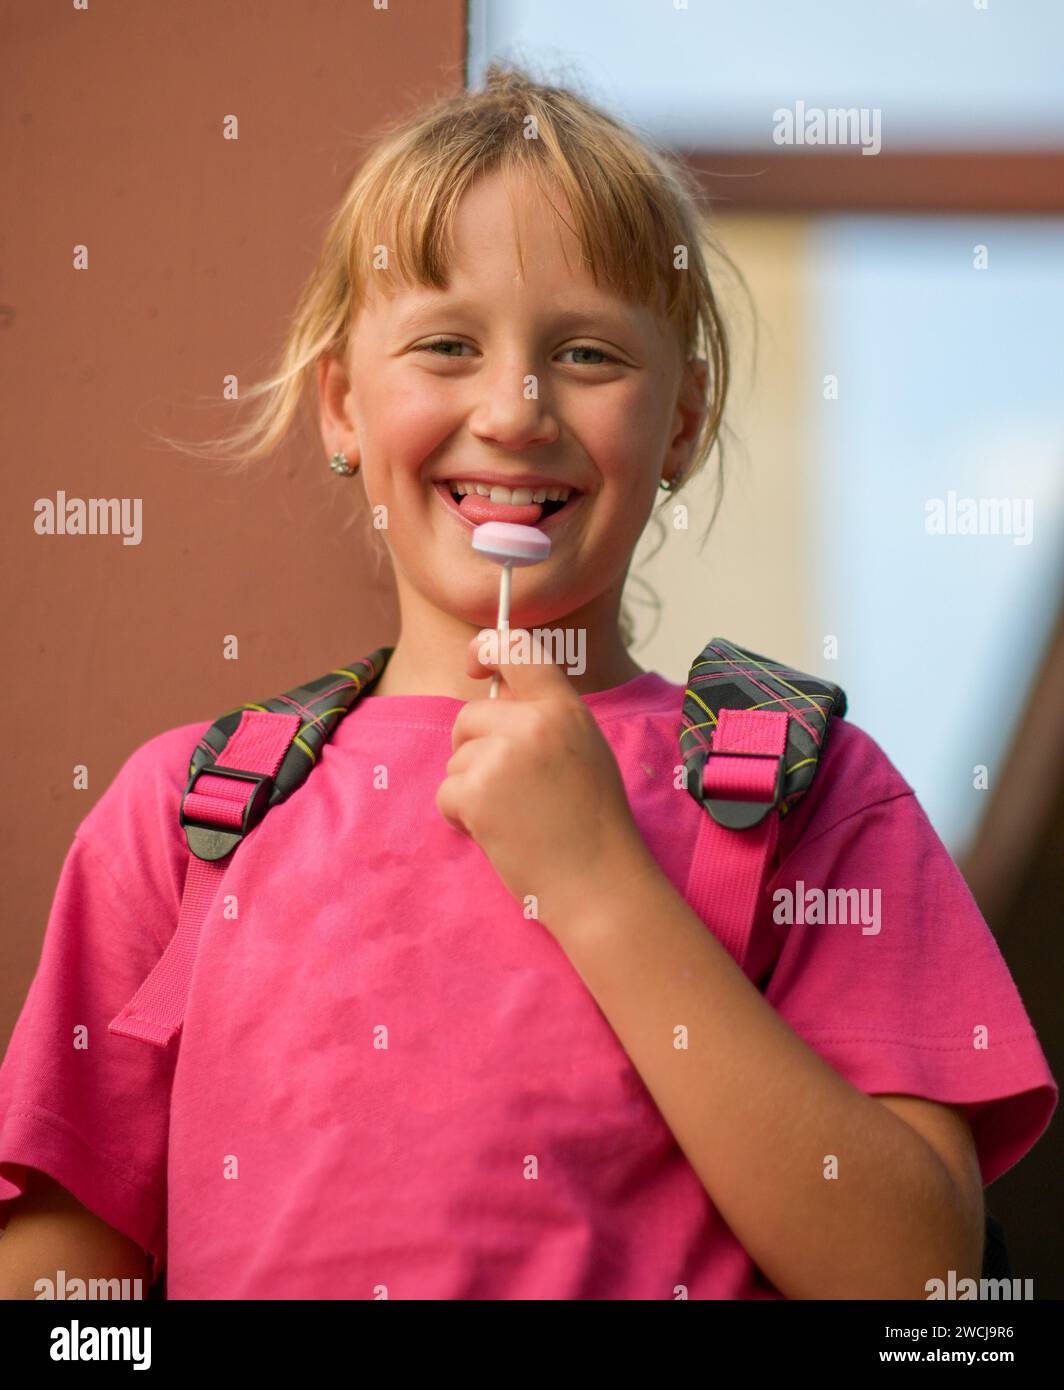 Little girl with a backpack on her back like a ski lollipop, blurred background. Stock Photo